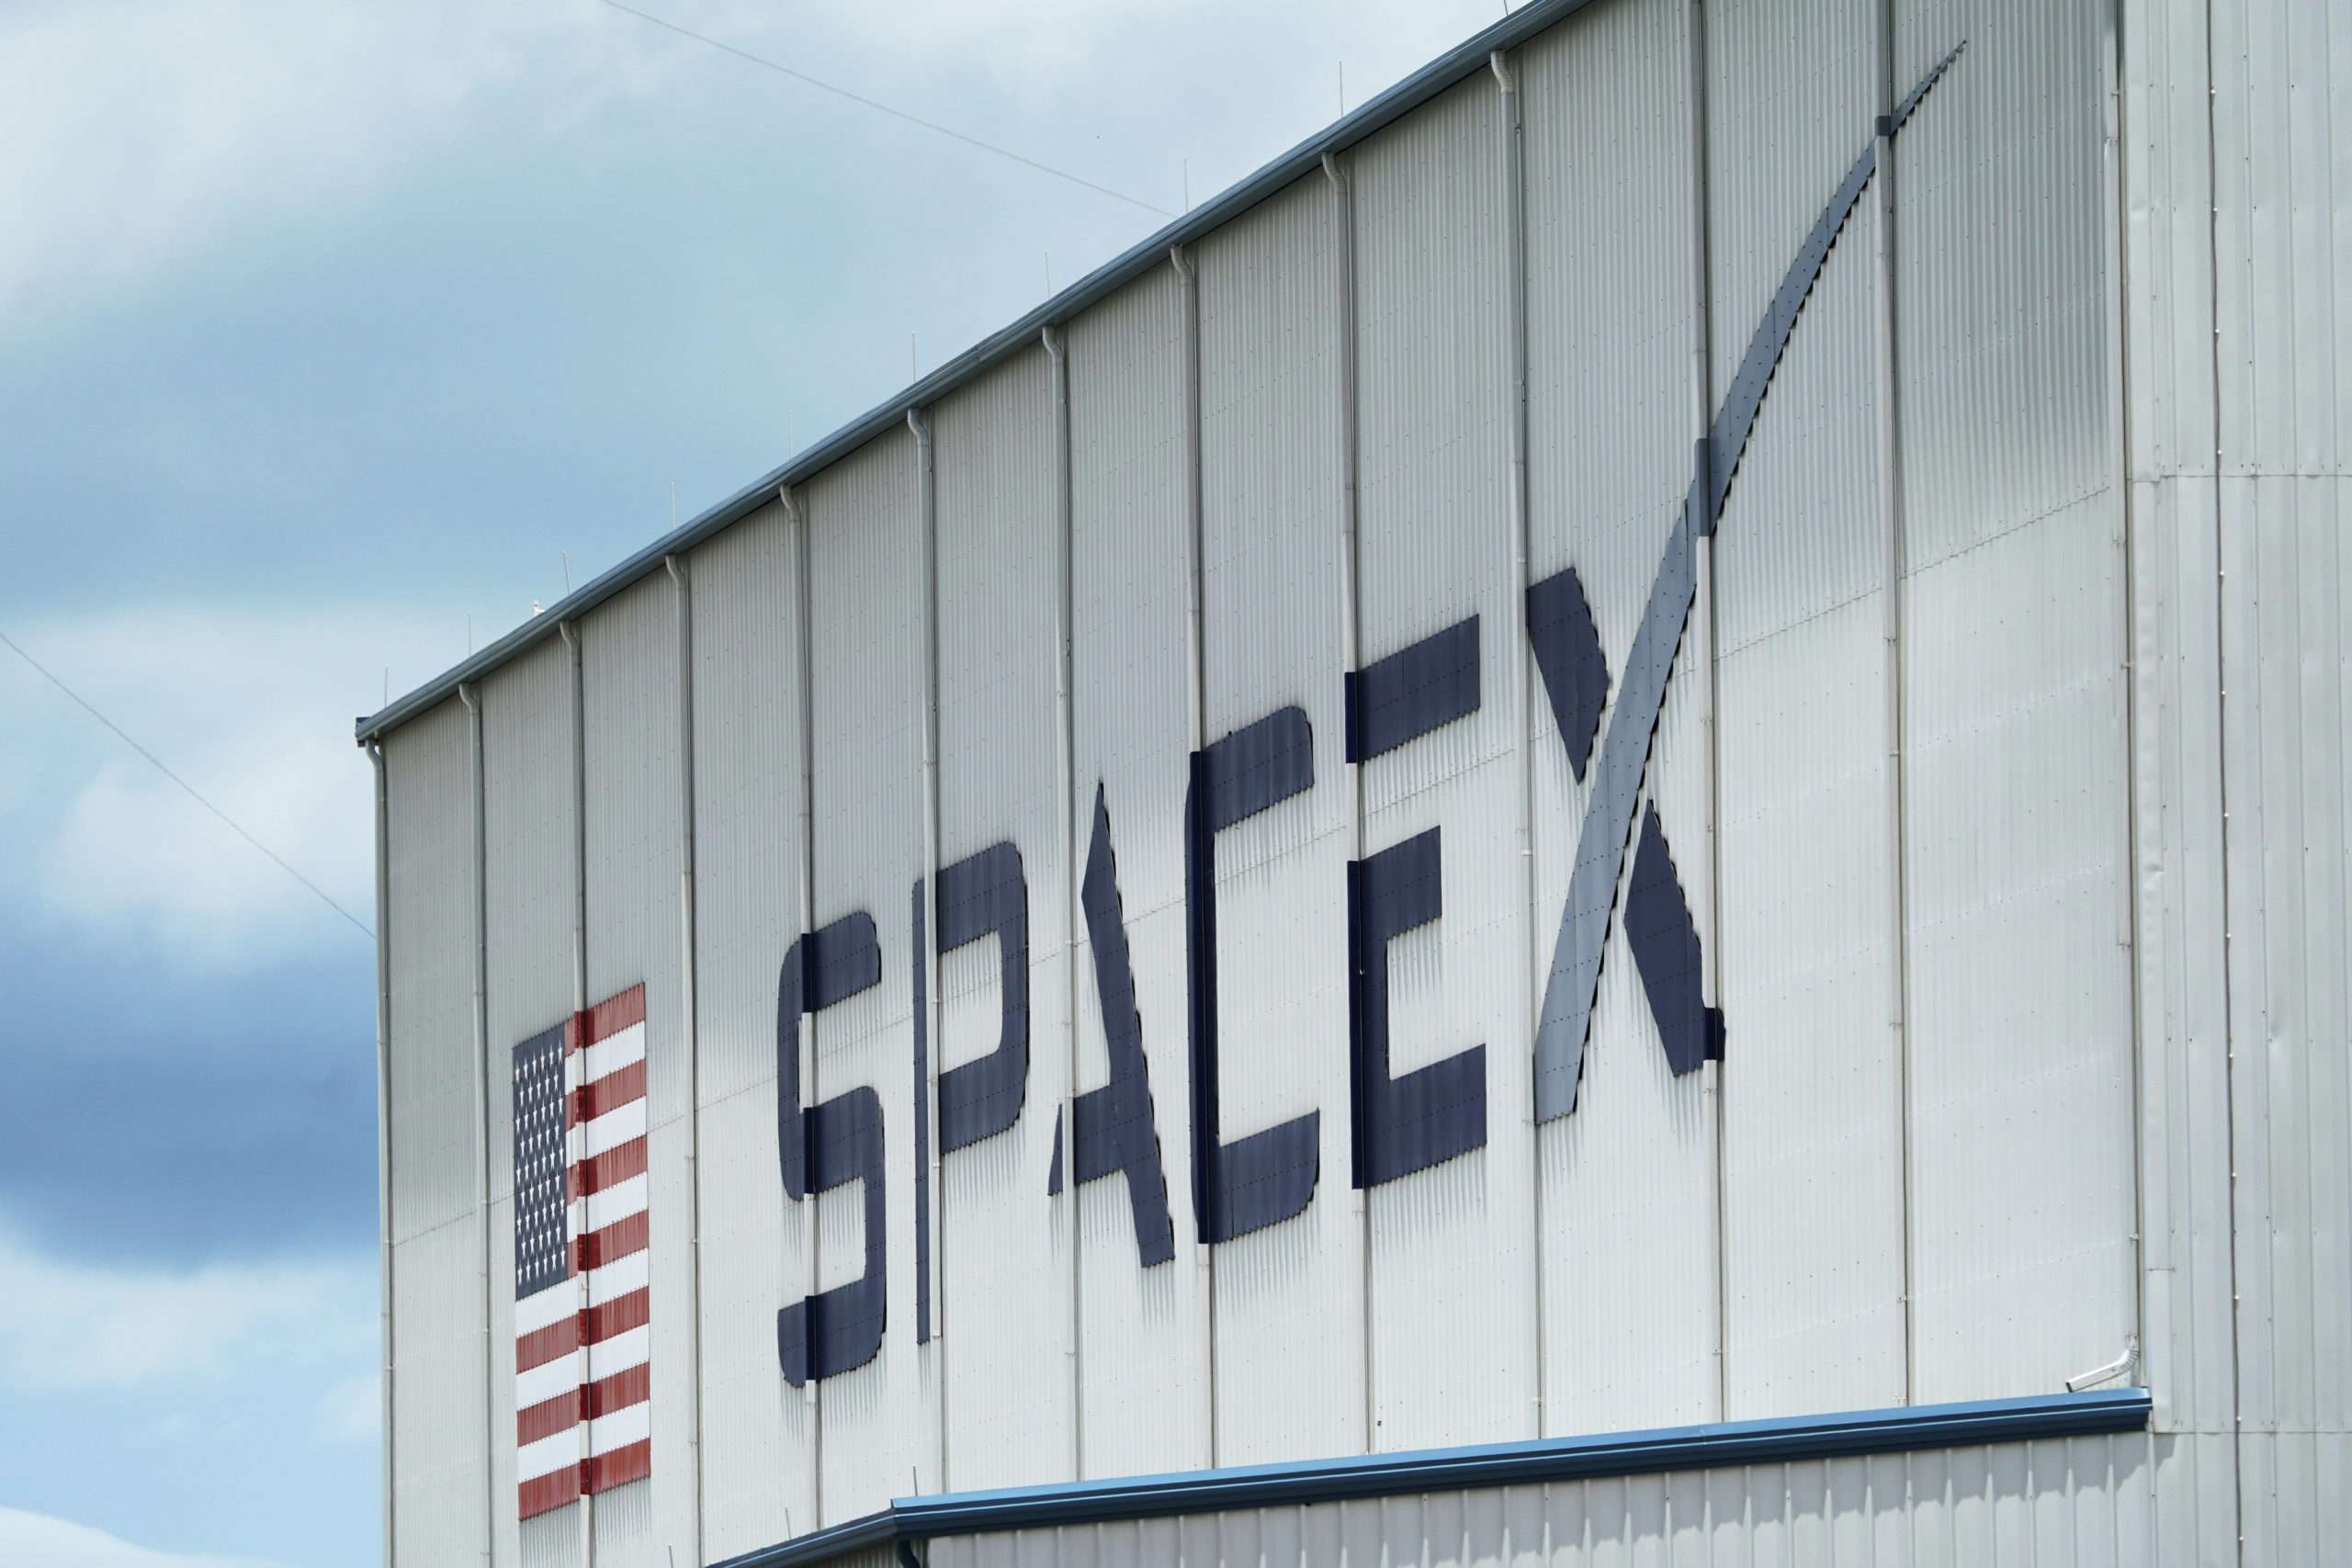 The SpaceX logo is displayed on a building at the Kennedy Space Center in Cape Canaveral, Florida, on May 26, 2020.